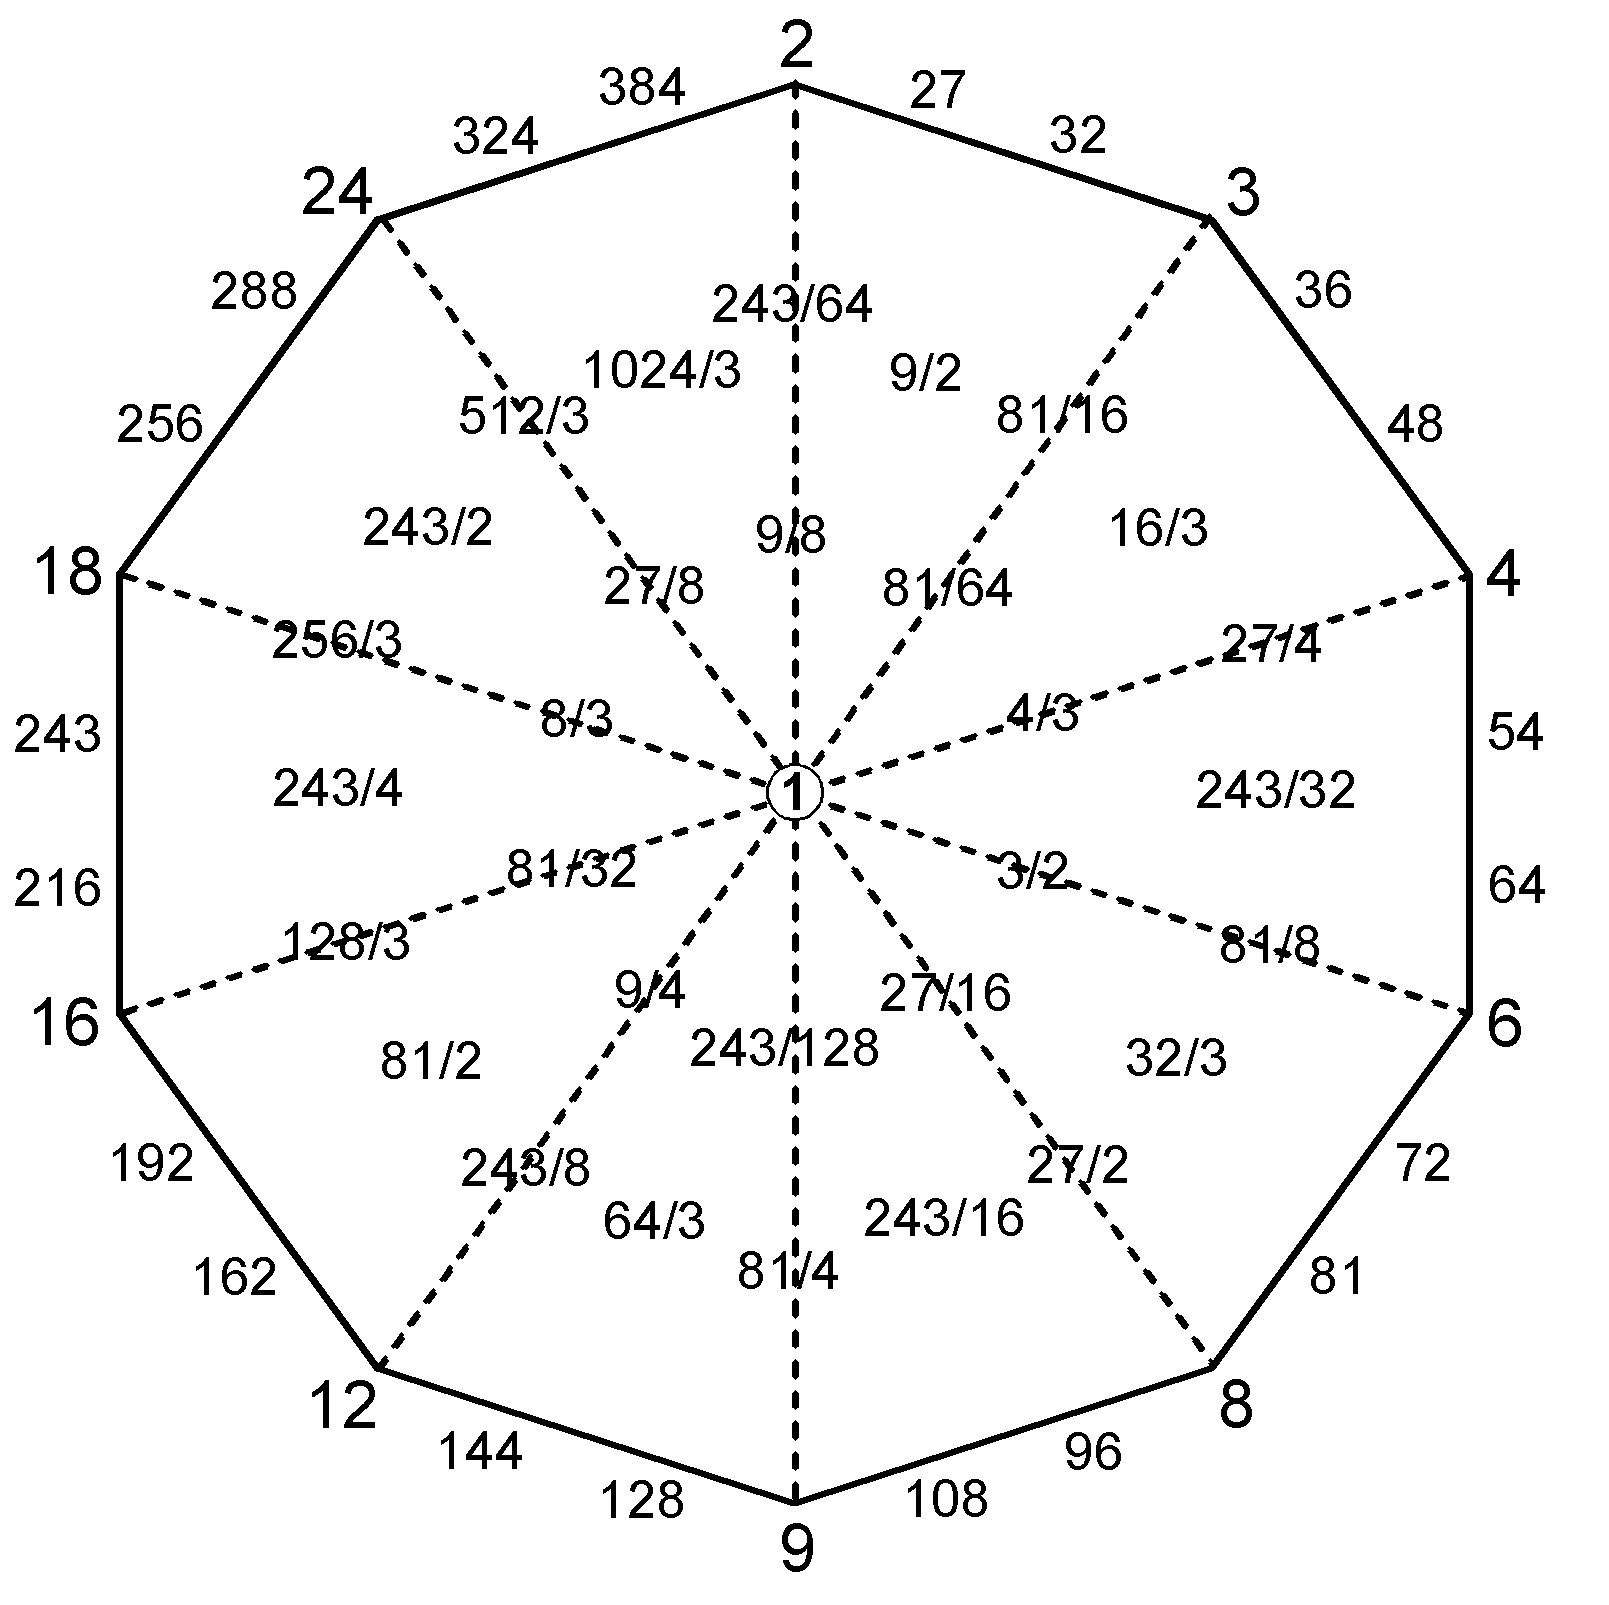 Decagonal representation of 61 notes up to G9